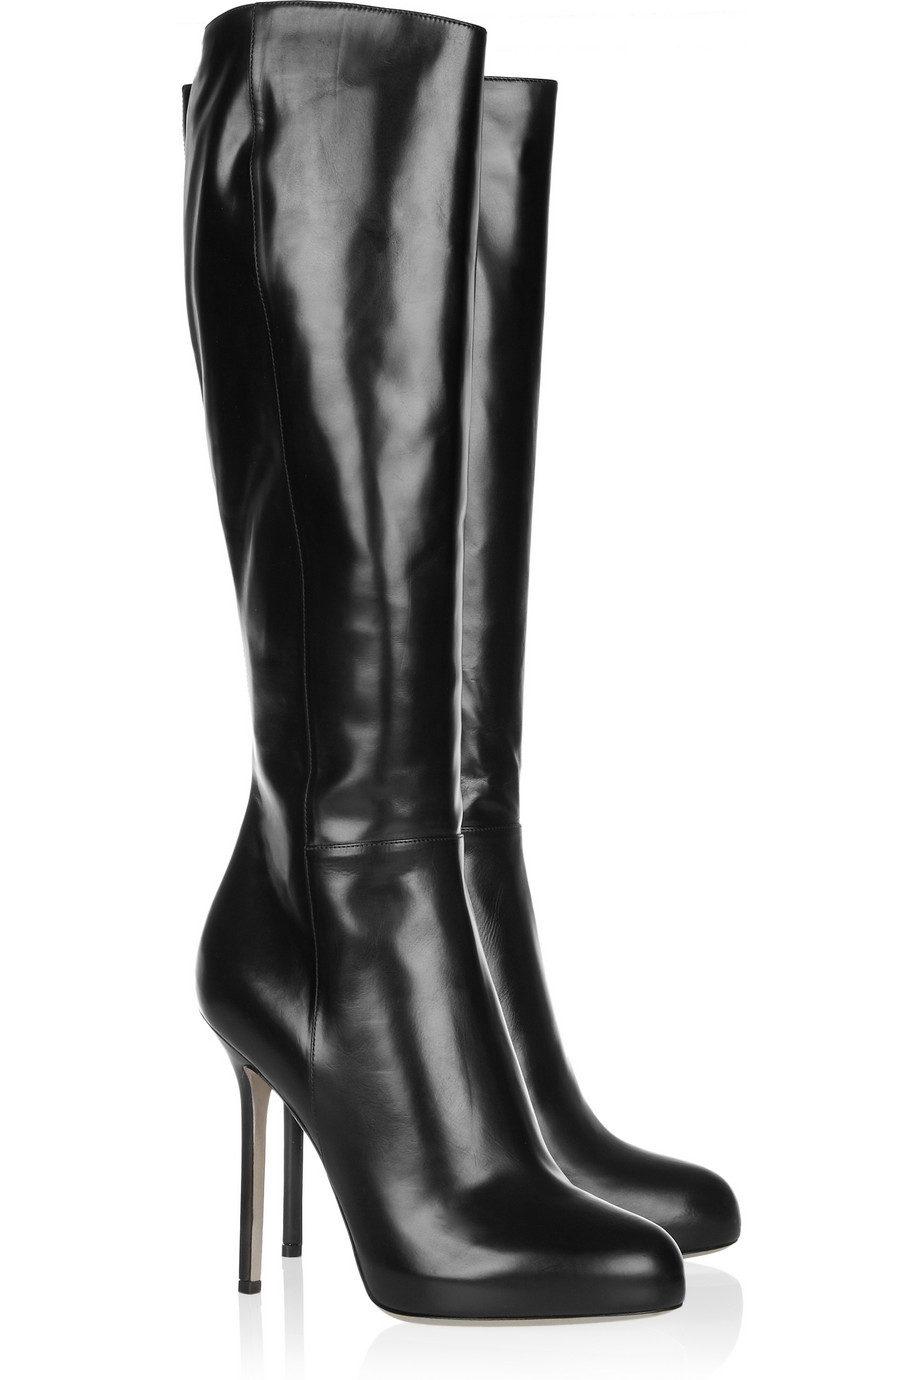 Sergio rossi Black Leather Boots in Black | Lyst